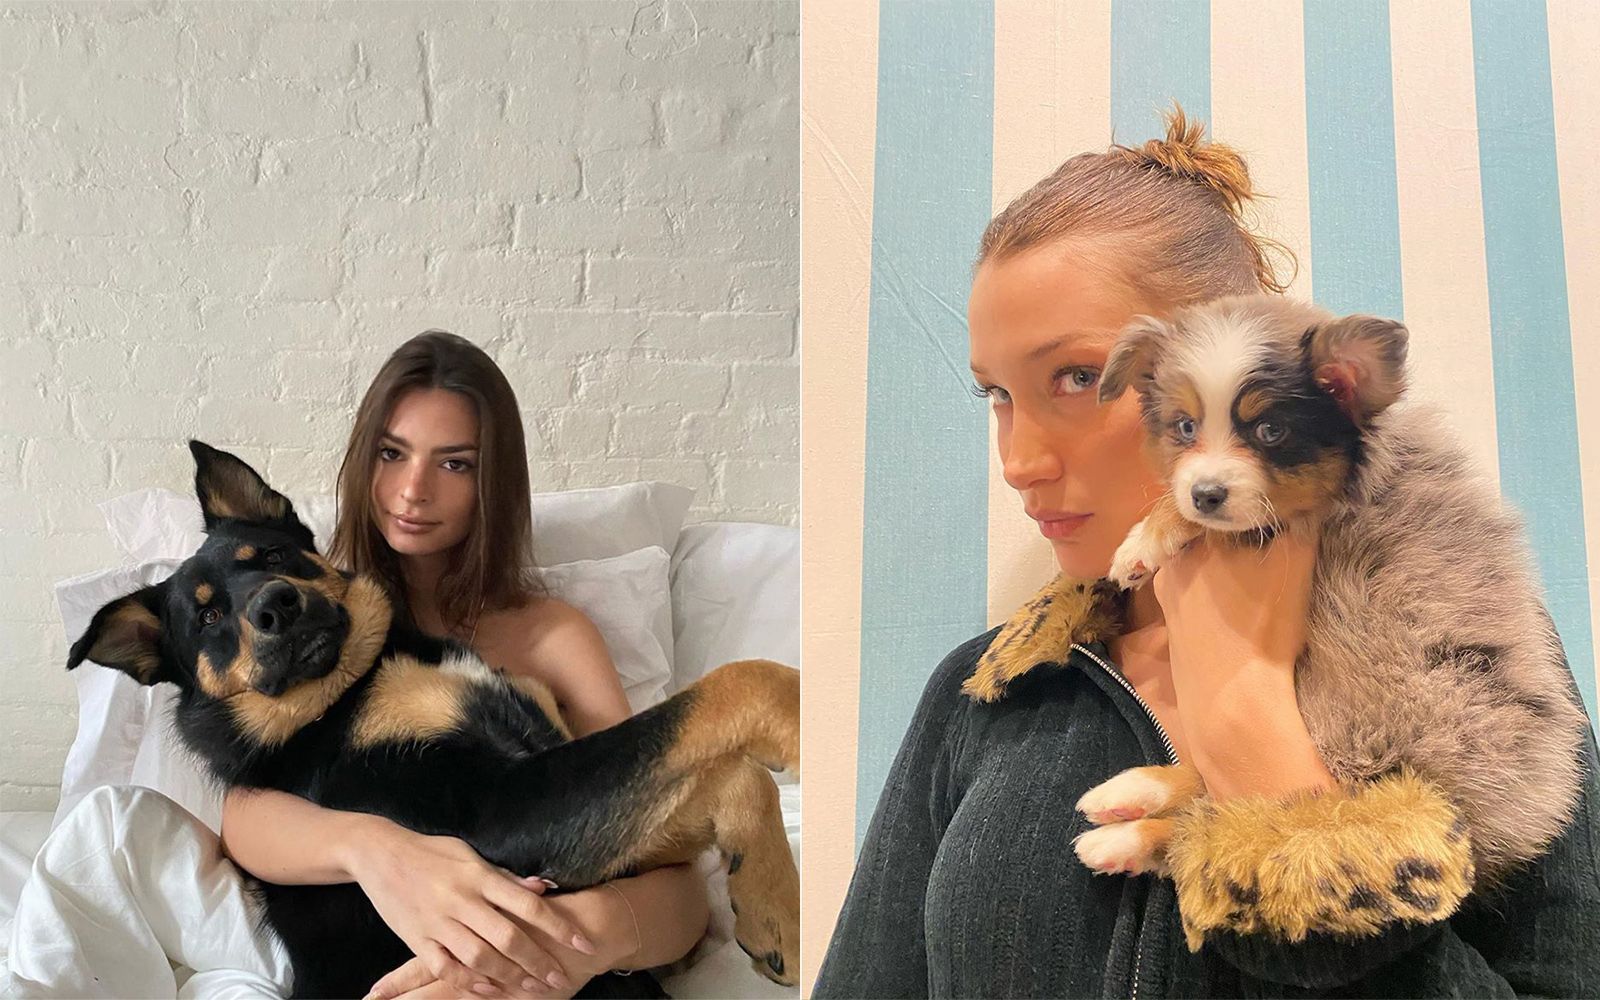 what breed of dog does kylie have